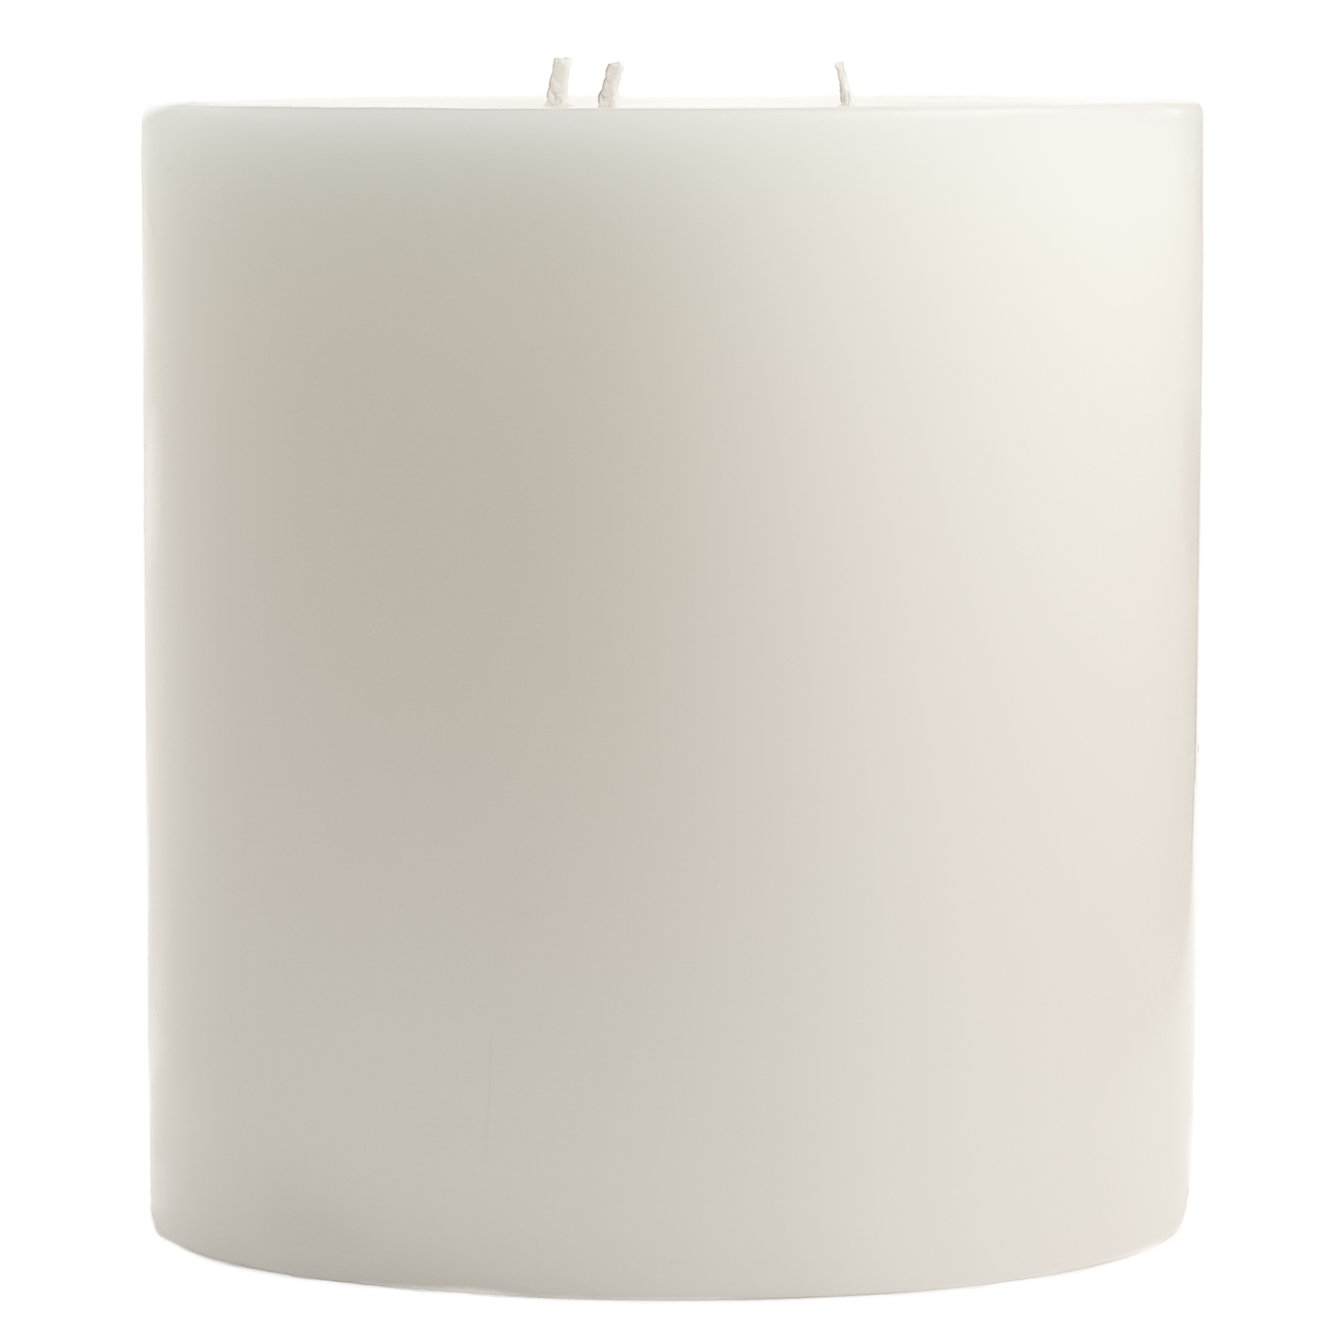 Unscented Hour Burn Time 6 White 3"x4" Pillar Candles 40 